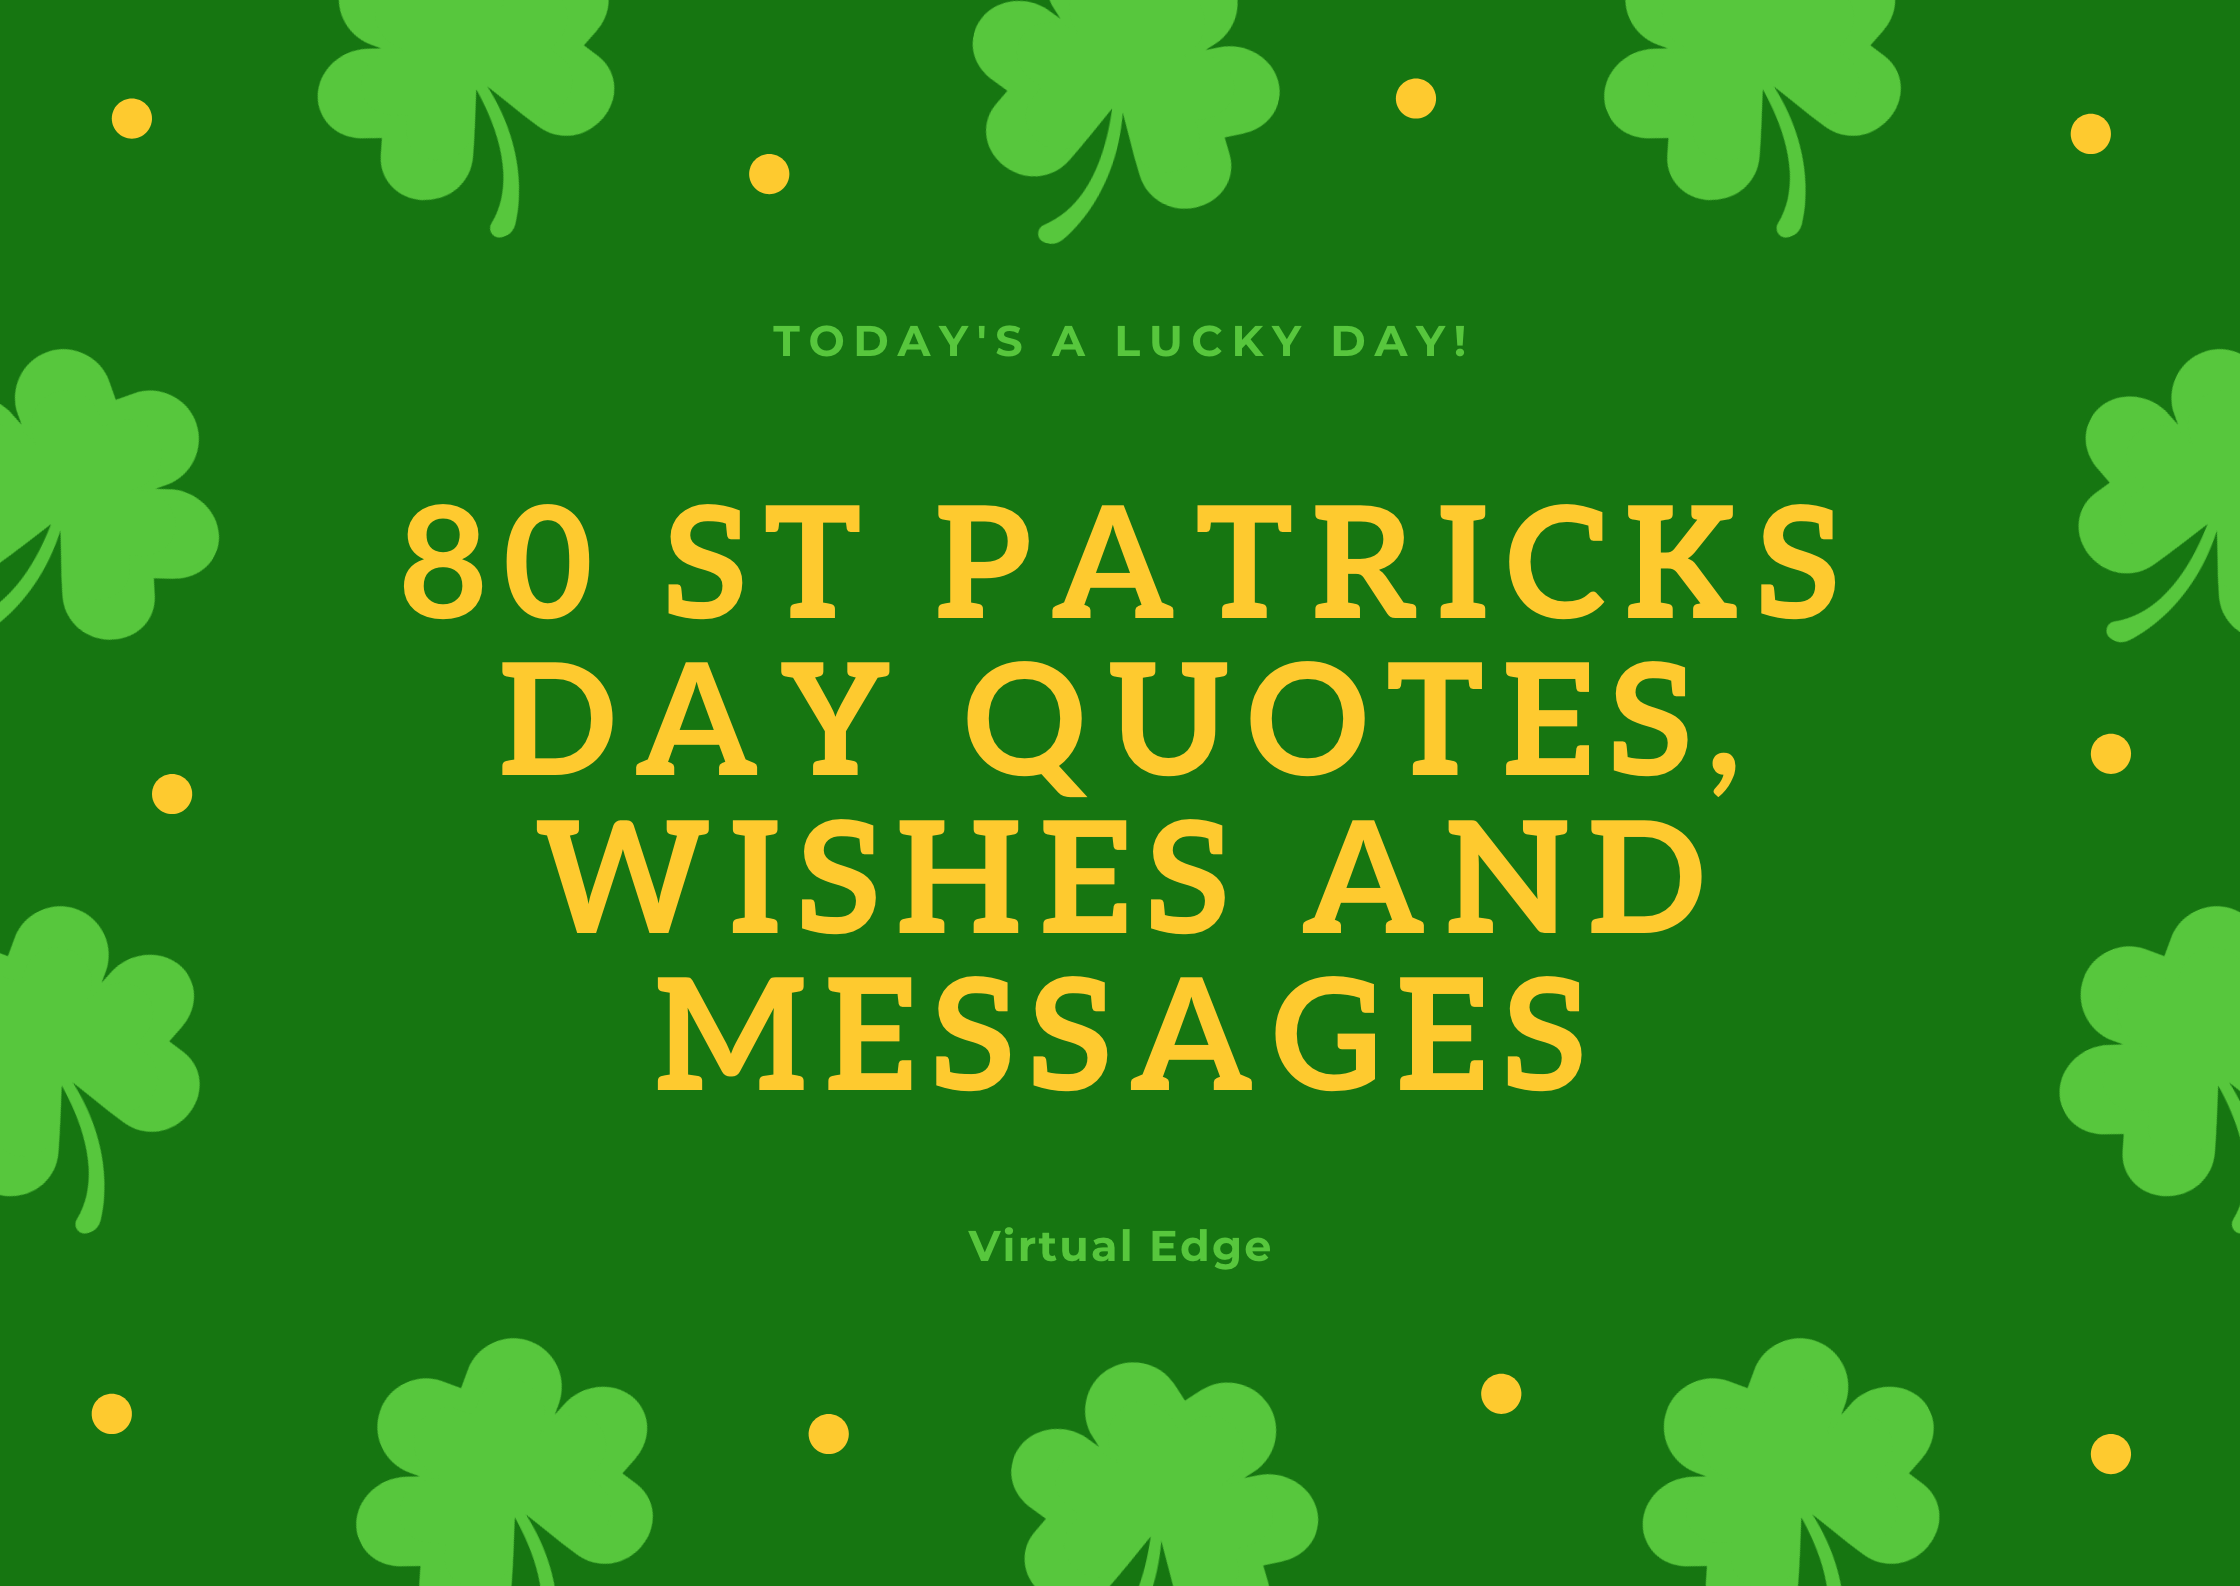 80 St Patricks Day Quotes, Wishes and Messages Virtual Edge